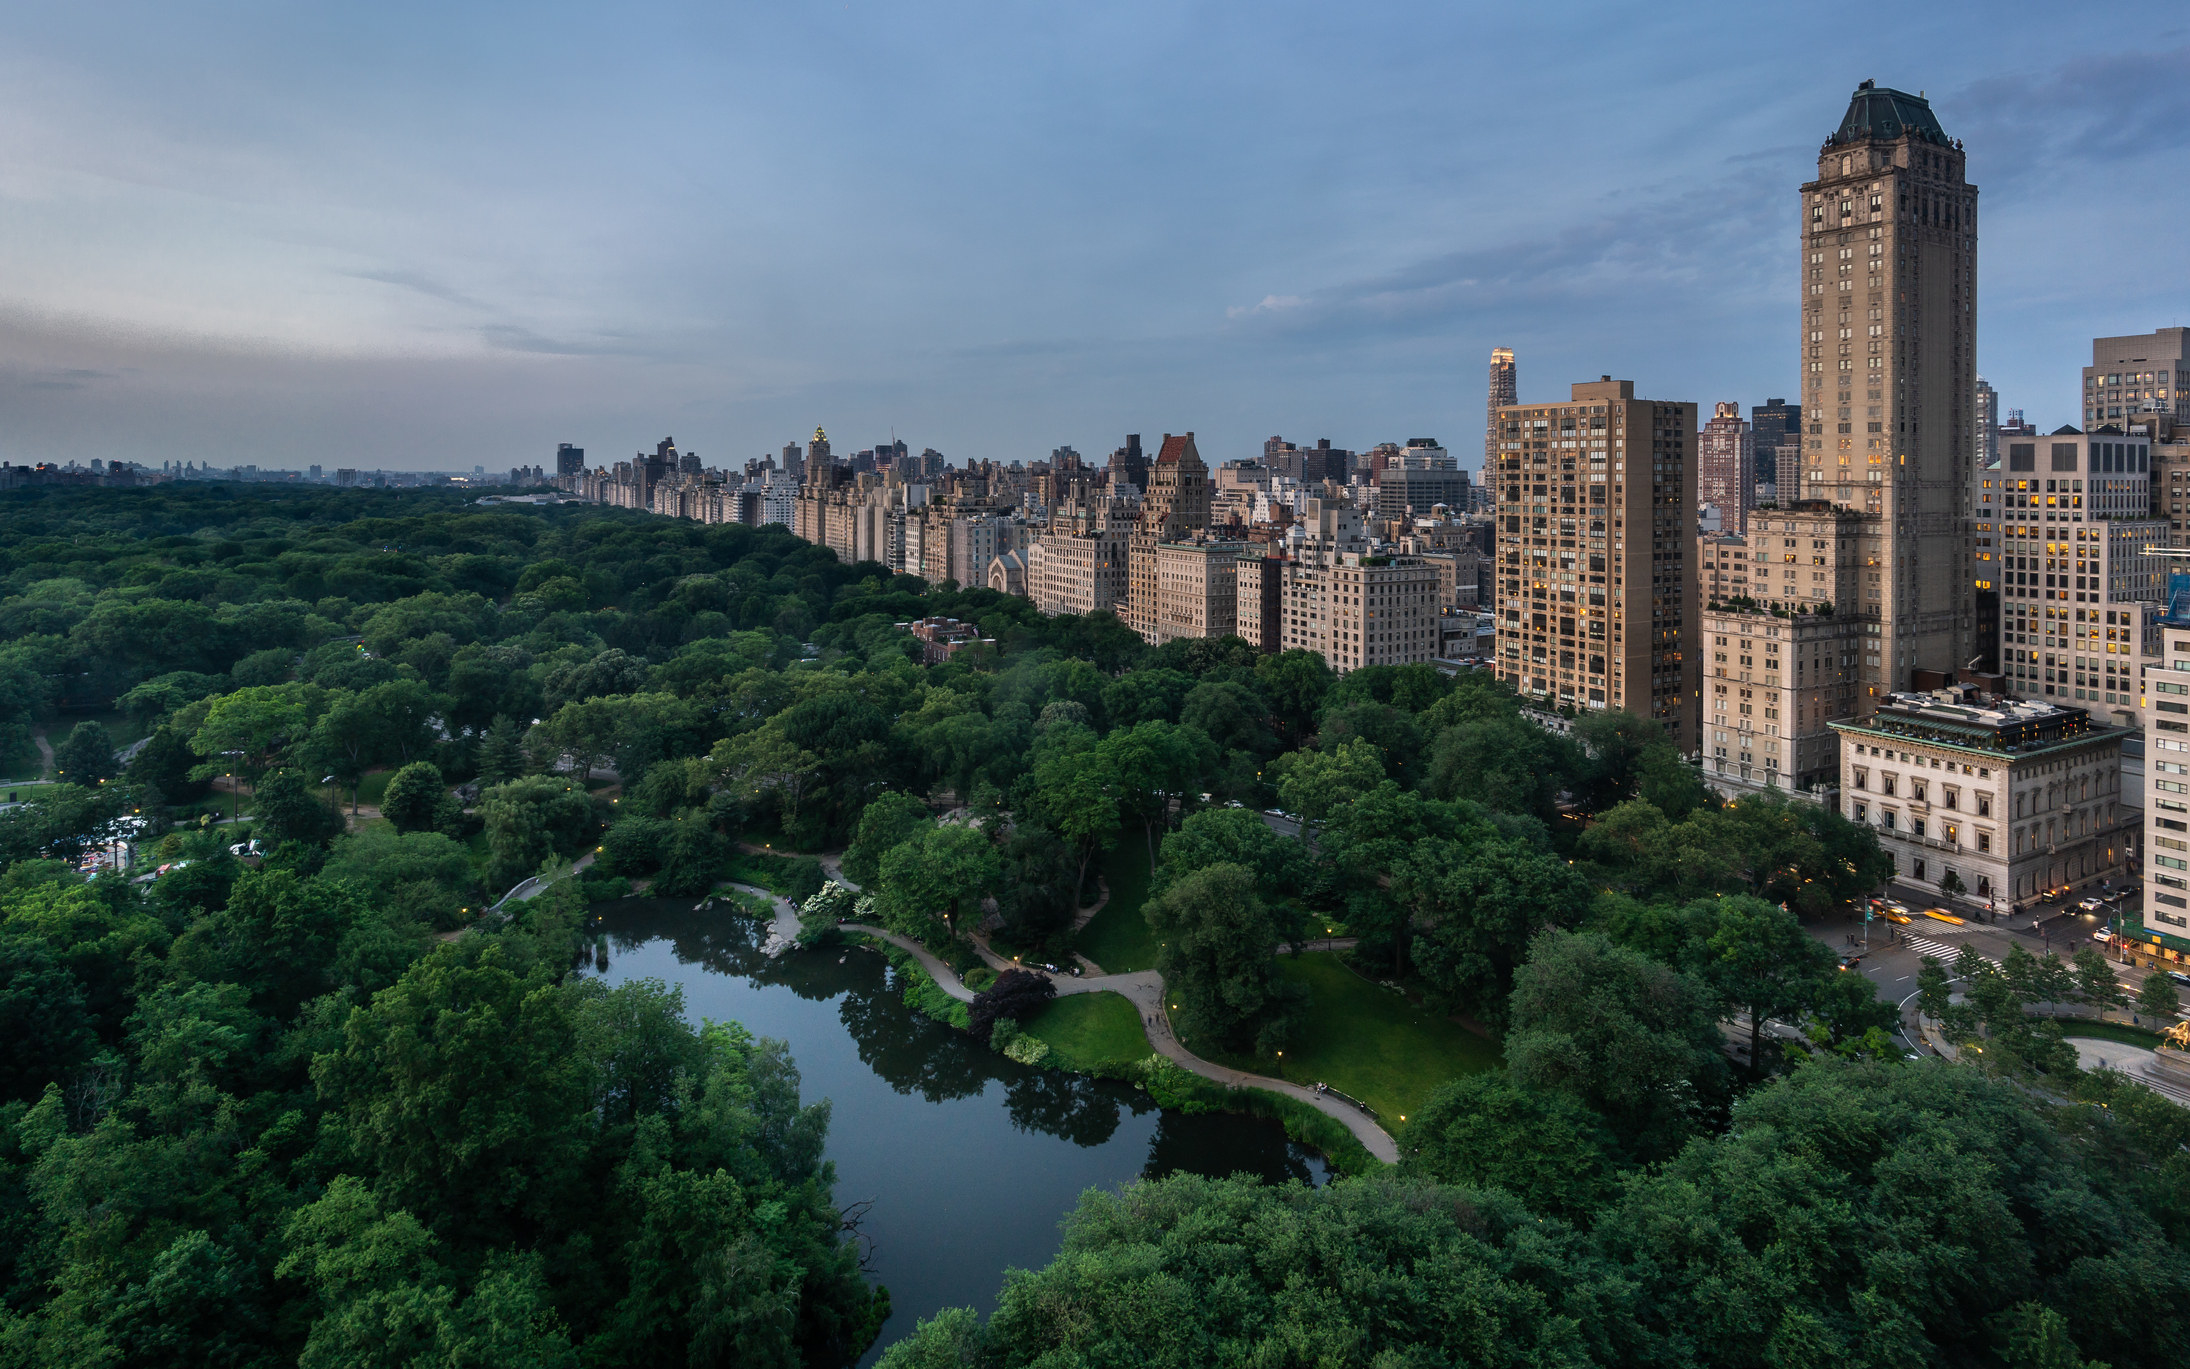 Central park in NYC.